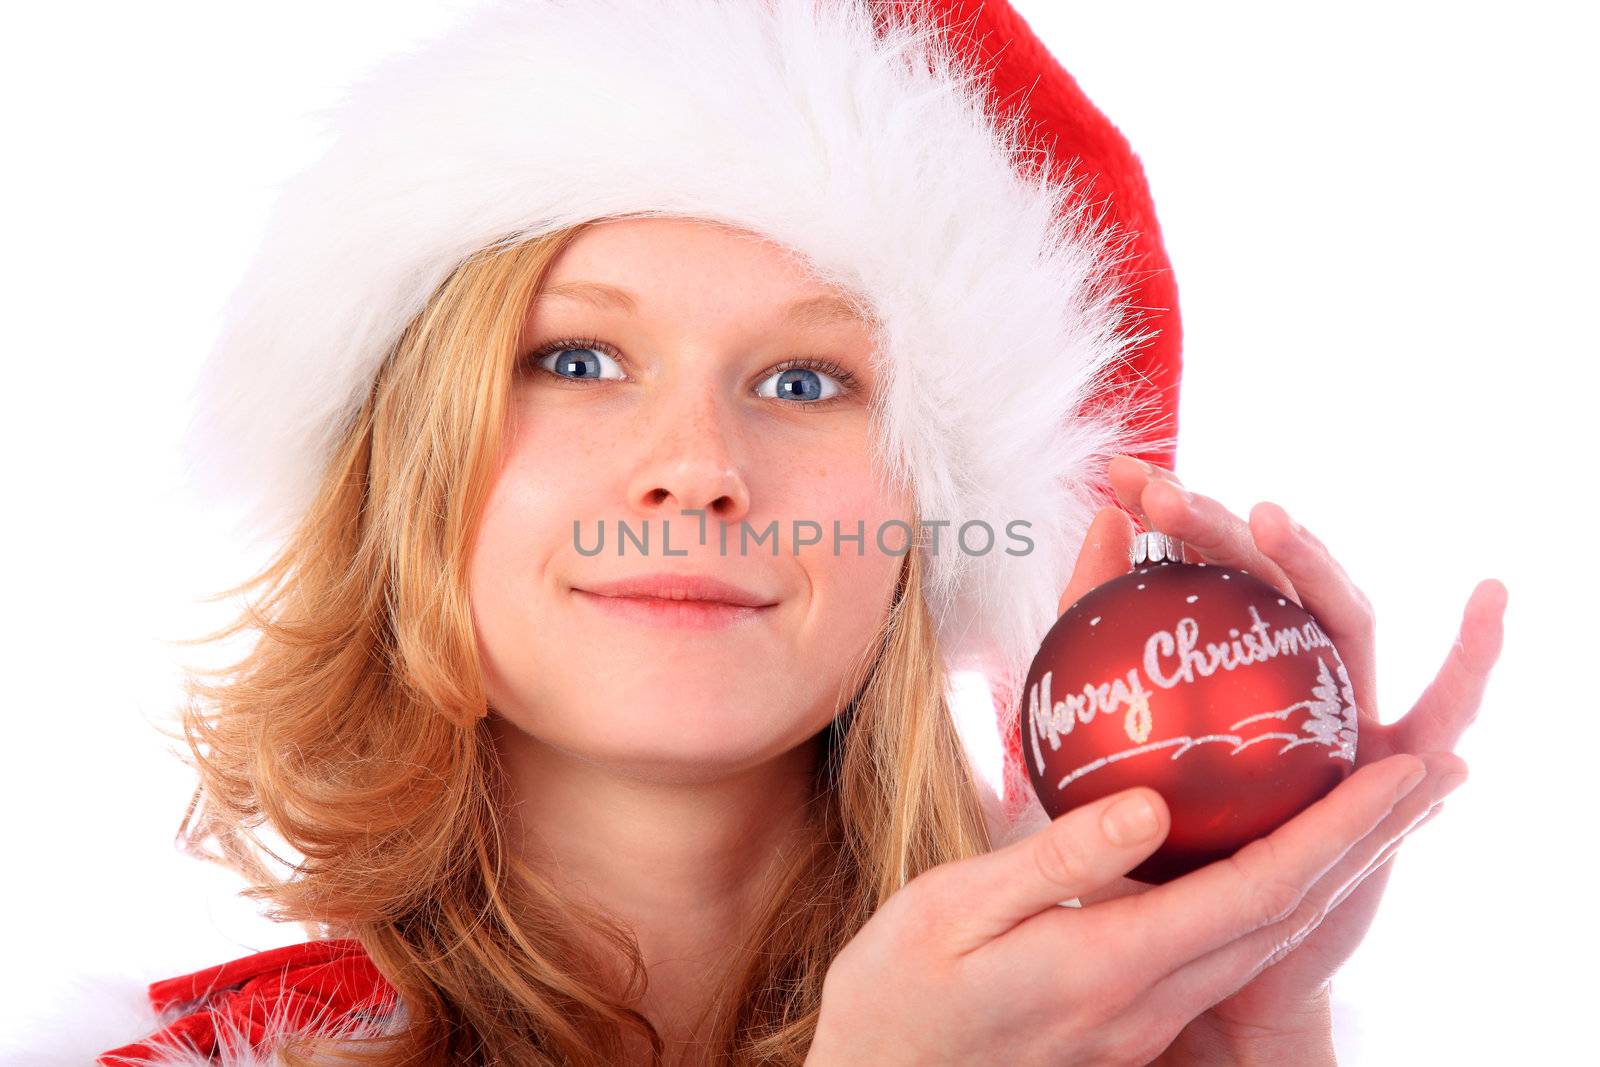 Miss Santa is smiling with wide open eyes and holding a red christmas tree ball - "Merry Christmas" is written on the ball